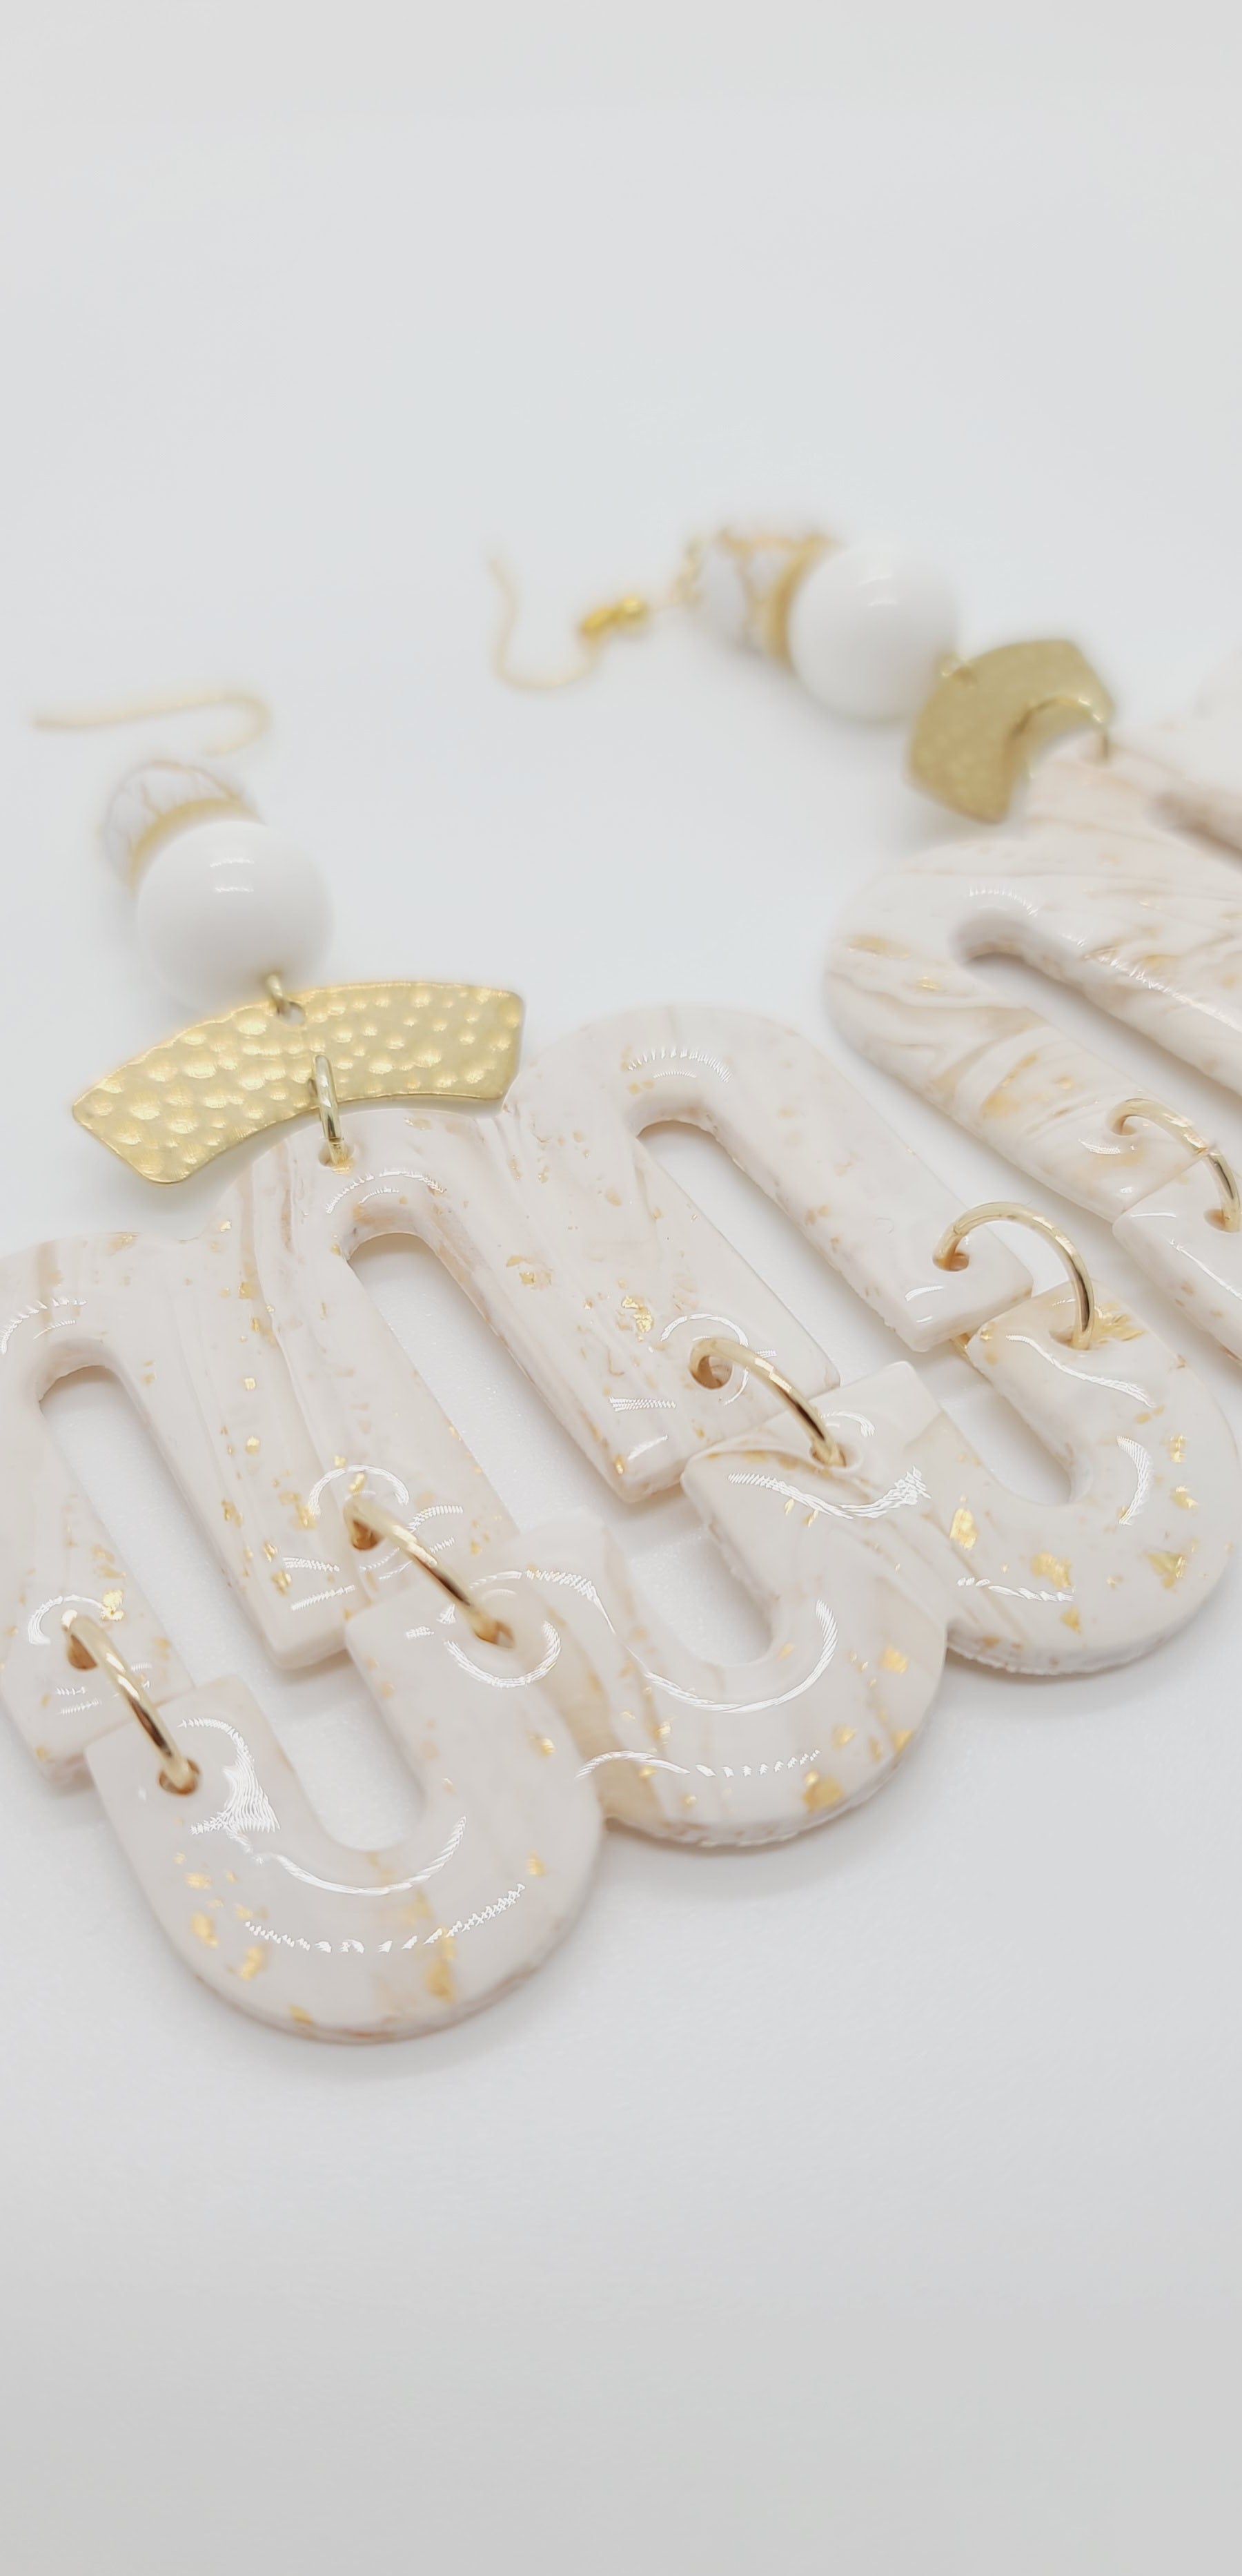 Length: 4 inches | Weight: 1.3 ounces  Distinctly You! These earrings are made with white and gold polymer clay covered in resin M/U-shape, hammered gold curved charms,10mm glass opaque glass beads, 8mm white and gold matte beads, and gold rondelles.